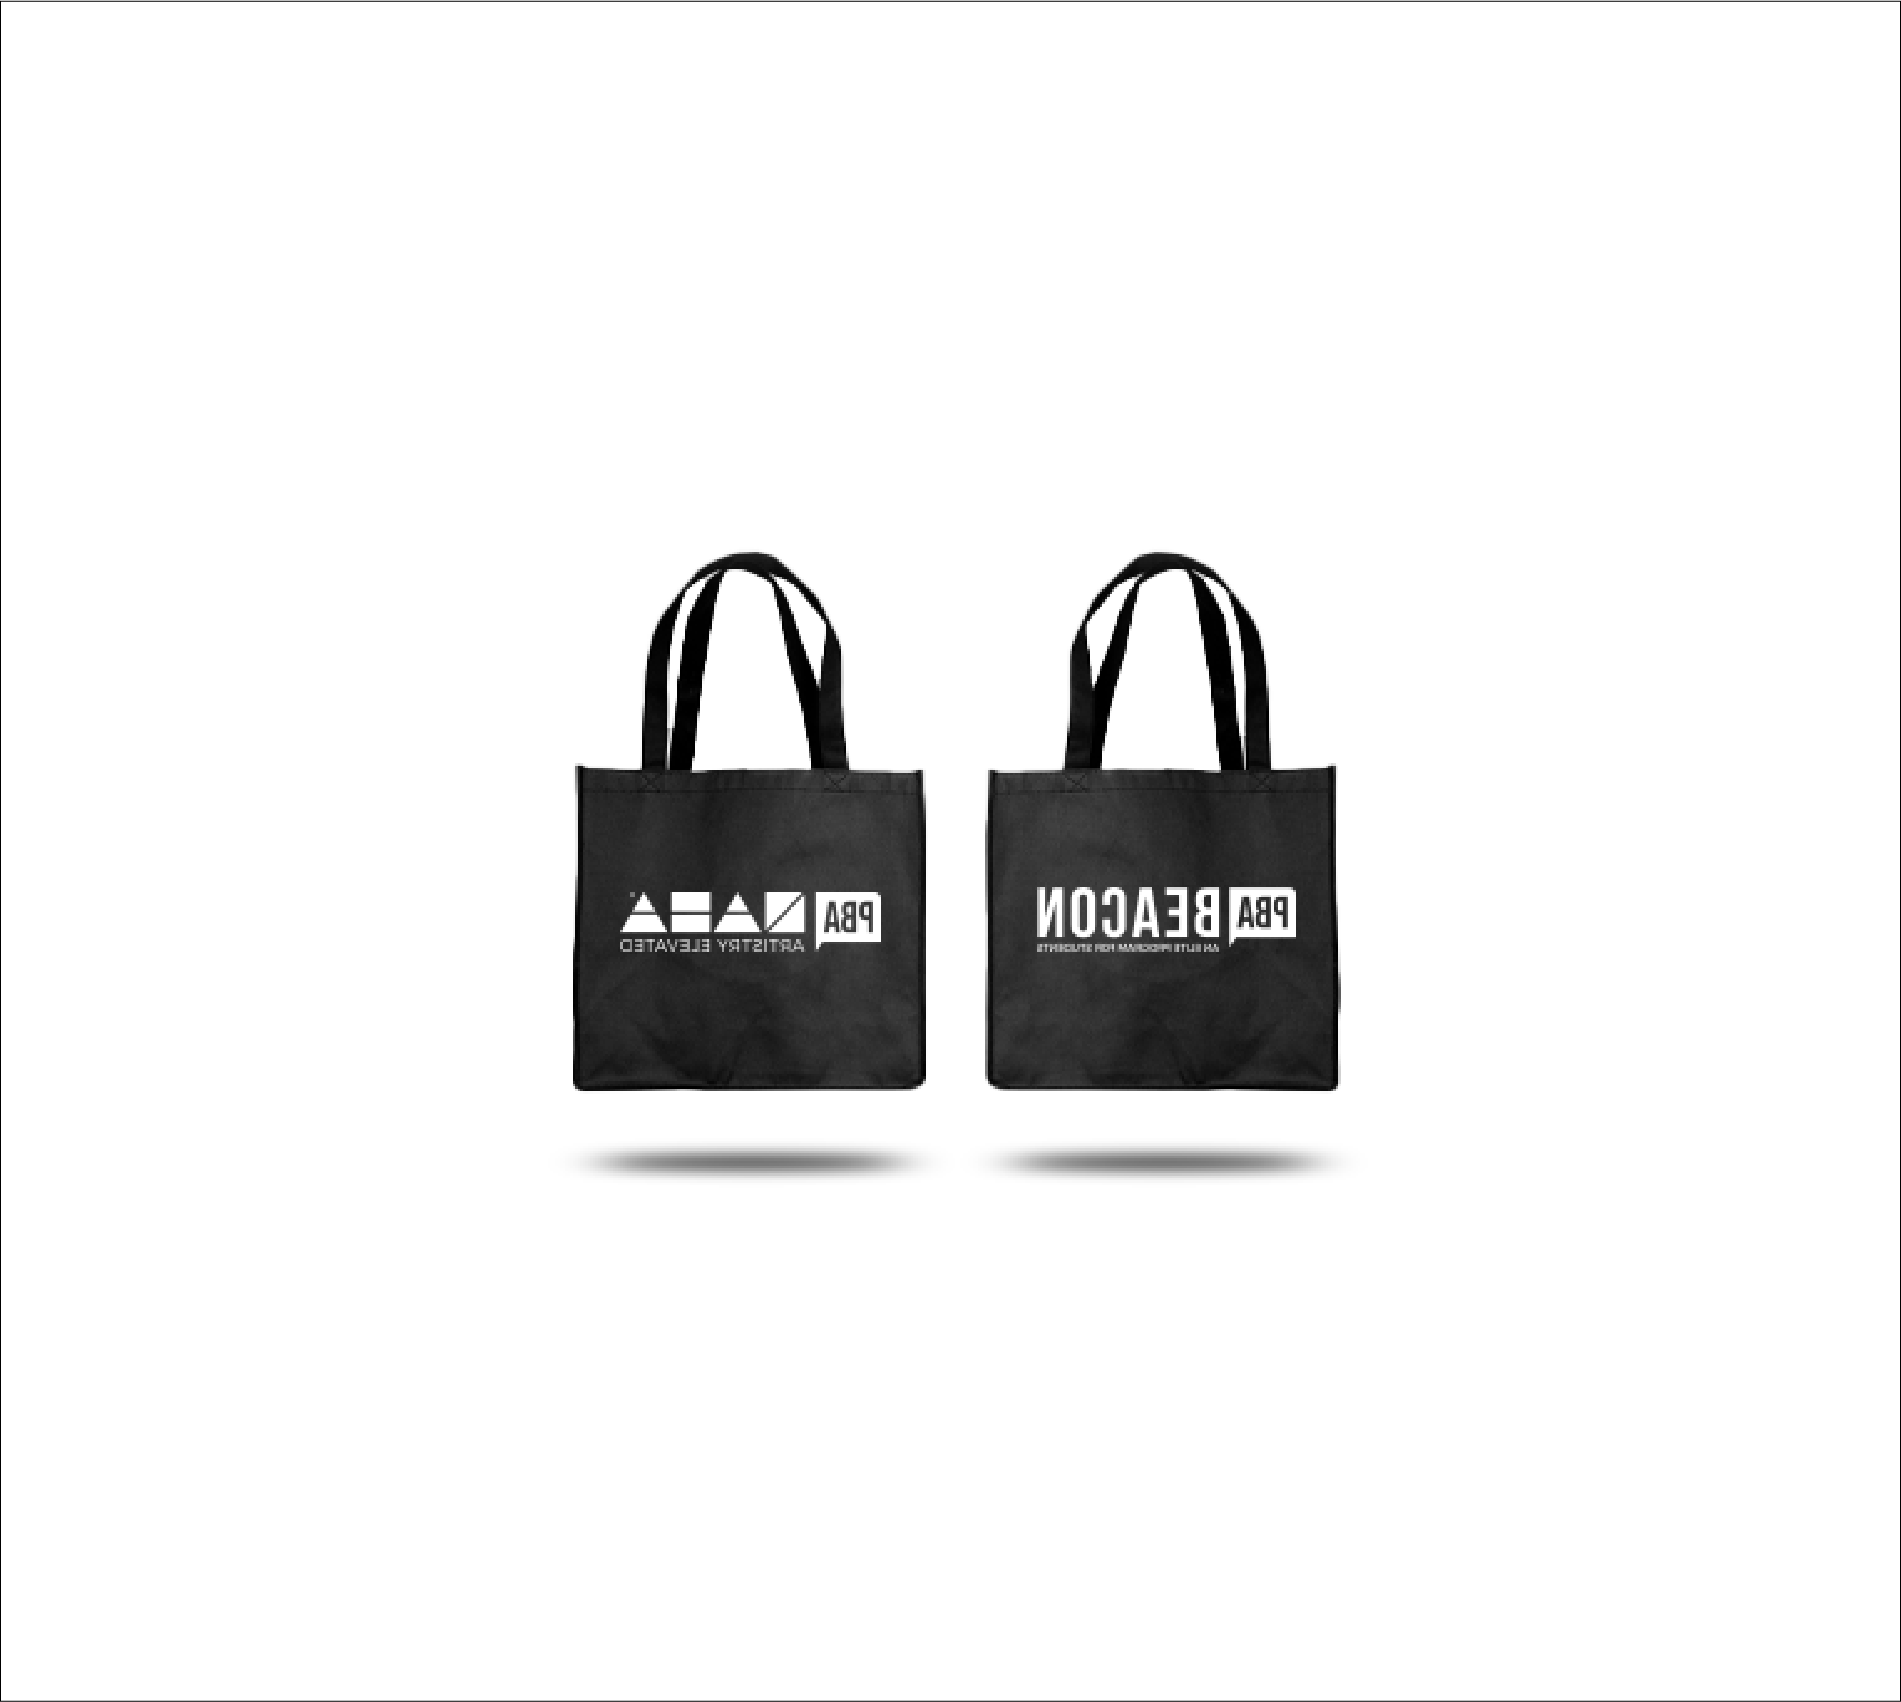 Picture of nba竞猜官网's 灯塔学生计划 and 那霸 swag bags